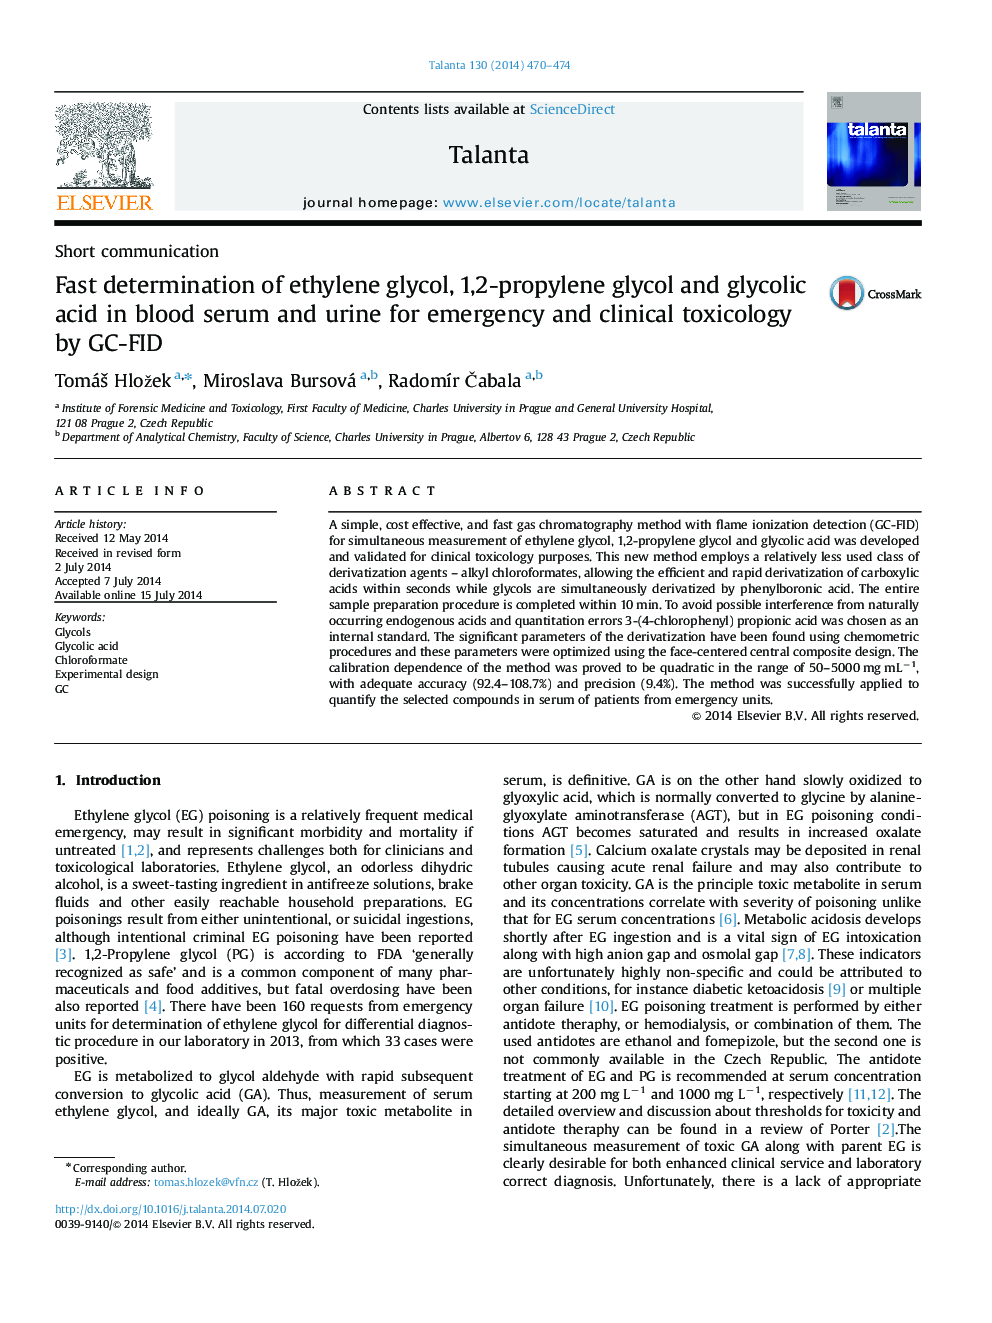 Fast determination of ethylene glycol, 1,2-propylene glycol and glycolic acid in blood serum and urine for emergency and clinical toxicology by GC-FID